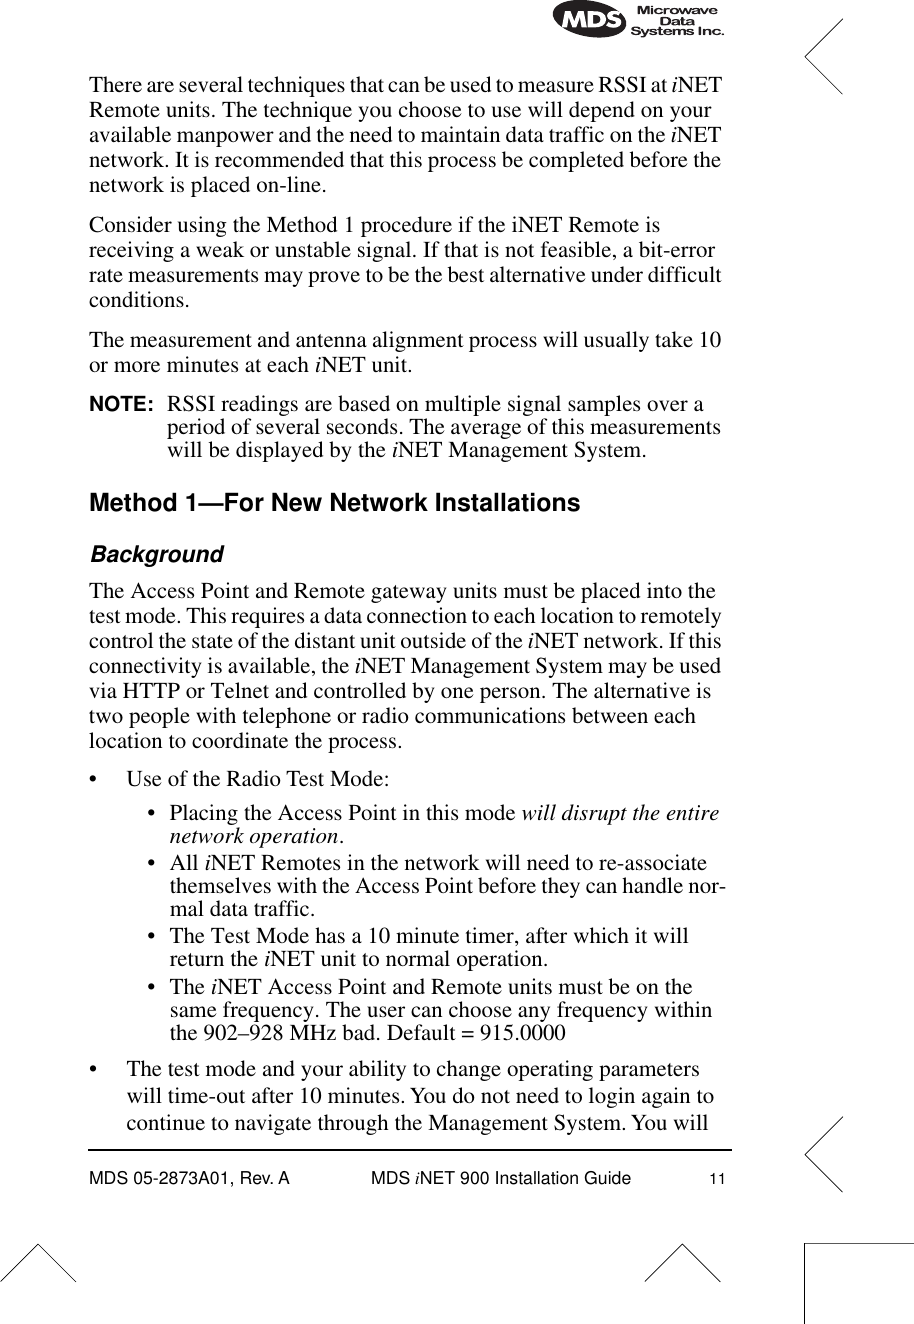  MDS 05-2873A01, Rev. A MDS  iNET 900 Installation Guide 11There are several techniques that can be used to measure RSSI at iNET Remote units. The technique you choose to use will depend on your available manpower and the need to maintain data traffic on the iNET network. It is recommended that this process be completed before the network is placed on-line.Consider using the Method 1 procedure if the iNET Remote is receiving a weak or unstable signal. If that is not feasible, a bit-error rate measurements may prove to be the best alternative under difficult conditions.The measurement and antenna alignment process will usually take 10 or more minutes at each iNET unit.NOTE: RSSI readings are based on multiple signal samples over a period of several seconds. The average of this measurements will be displayed by the iNET Management System.Method 1—For New Network InstallationsBackgroundThe Access Point and Remote gateway units must be placed into the test mode. This requires a data connection to each location to remotely control the state of the distant unit outside of the iNET network. If this connectivity is available, the iNET Management System may be used via HTTP or Telnet and controlled by one person. The alternative is two people with telephone or radio communications between each location to coordinate the process.• Use of the Radio Test Mode:• Placing the Access Point in this mode will disrupt the entire network operation.• All iNET Remotes in the network will need to re-associate themselves with the Access Point before they can handle nor-mal data traffic.• The Test Mode has a 10 minute timer, after which it will return the iNET unit to normal operation.• The iNET Access Point and Remote units must be on the same frequency. The user can choose any frequency within the 902–928 MHz bad. Default = 915.0000• The test mode and your ability to change operating parameters will time-out after 10 minutes. You do not need to login again to continue to navigate through the Management System. You will 